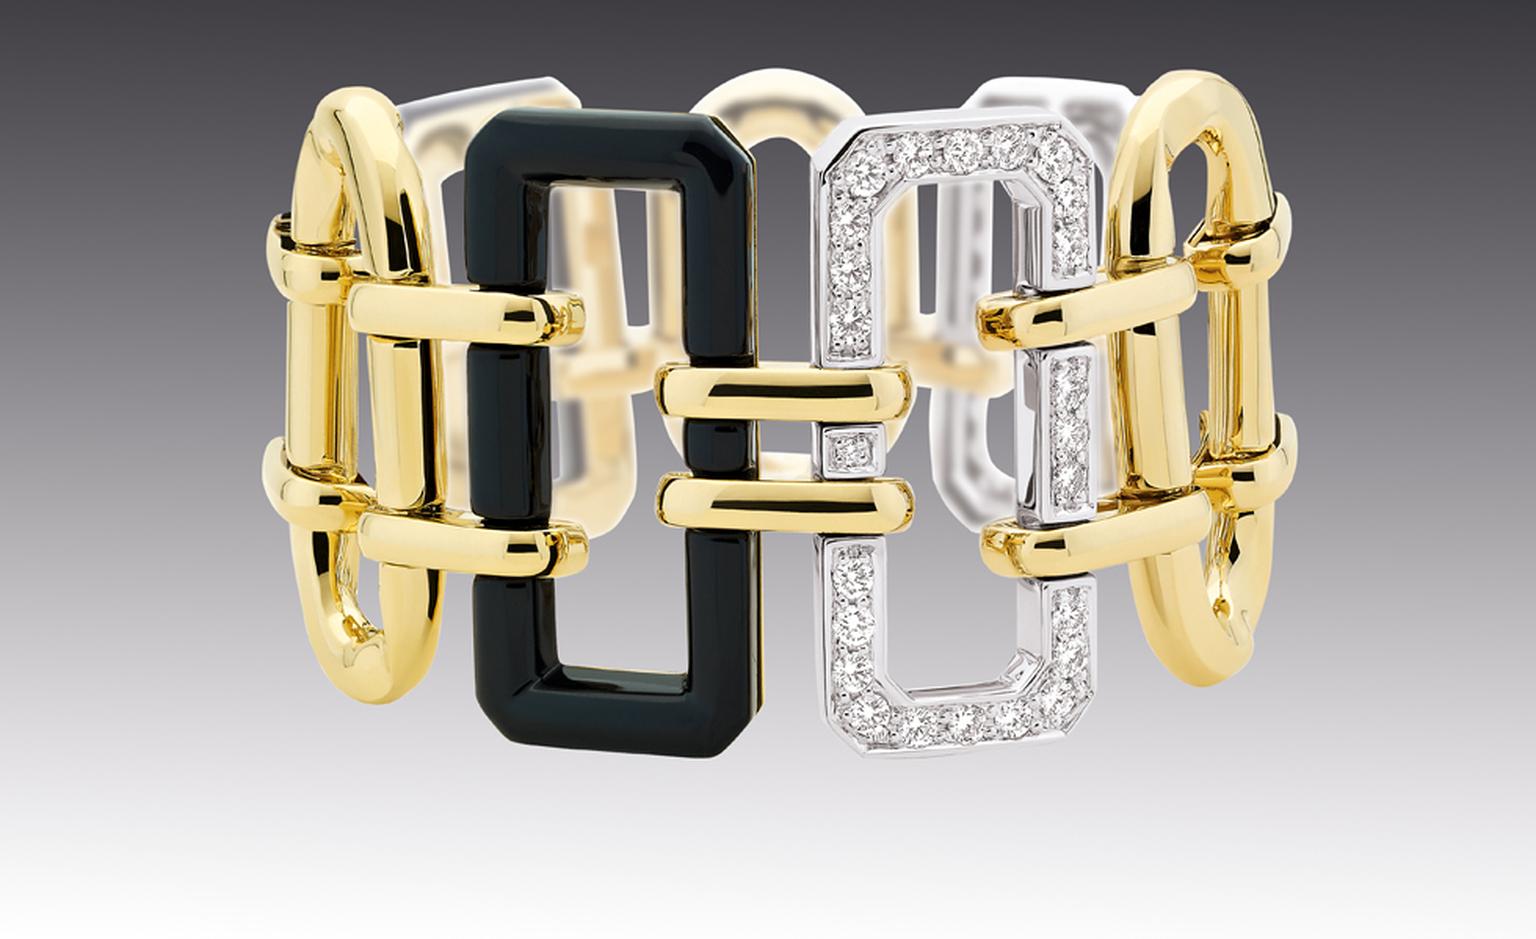 CHANEL, The Premiere cuff in 18kt white and yellow gold with onyx. £18,675